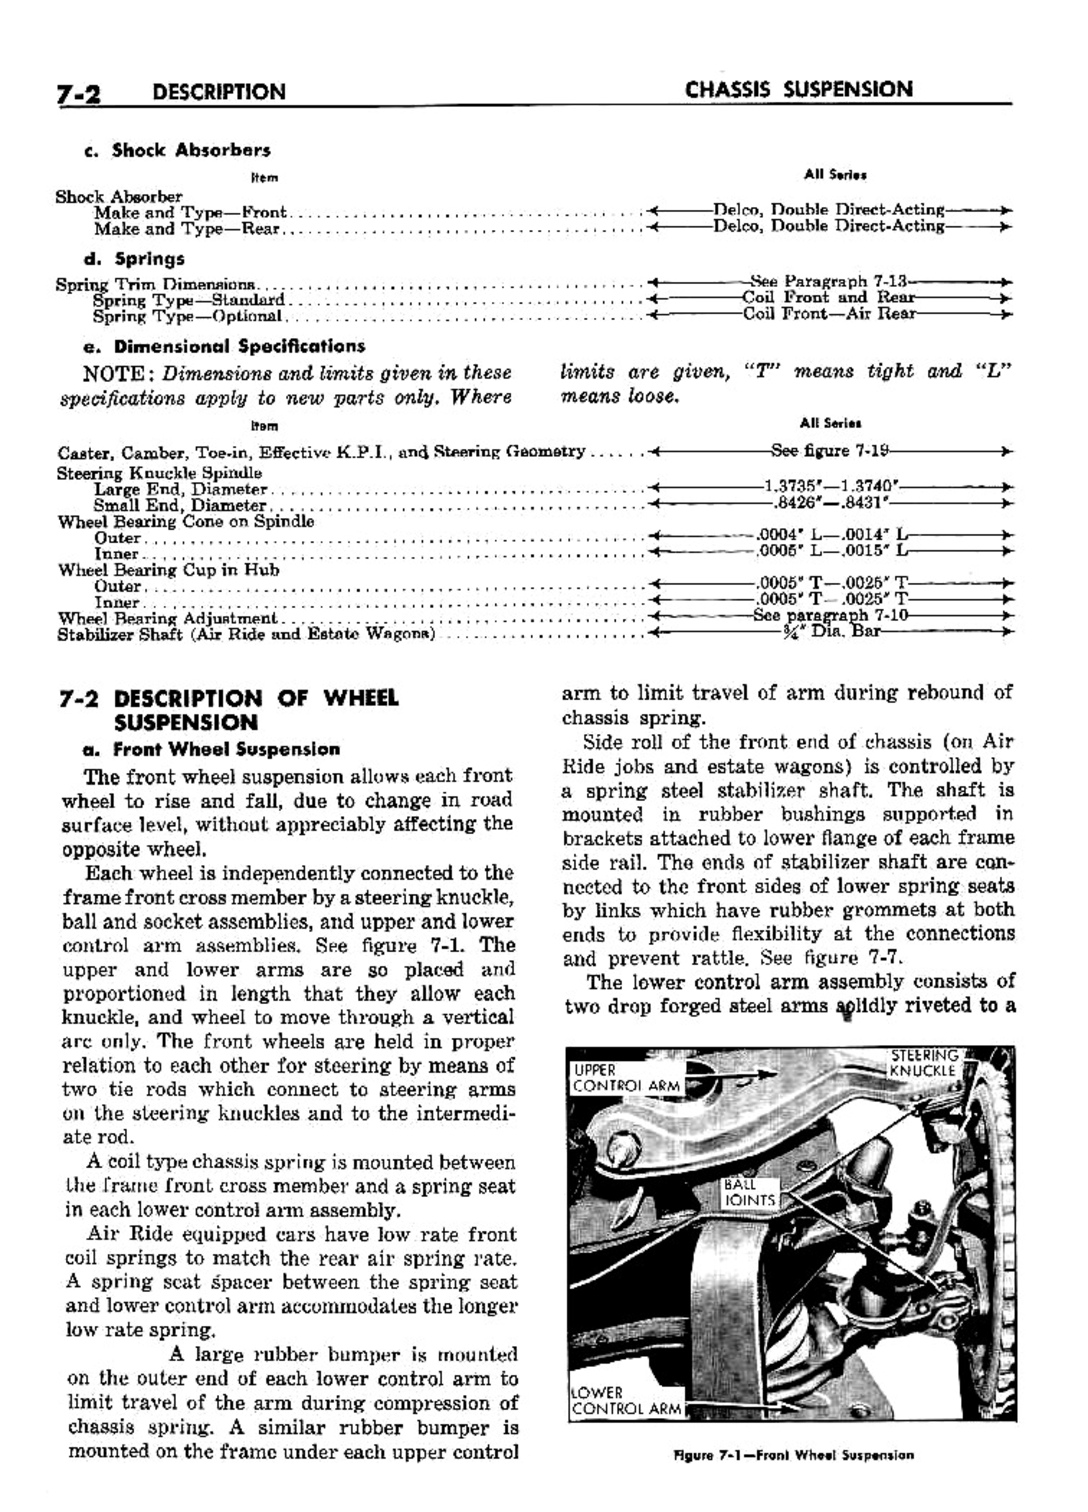 n_08 1959 Buick Shop Manual - Chassis Suspension-002-002.jpg